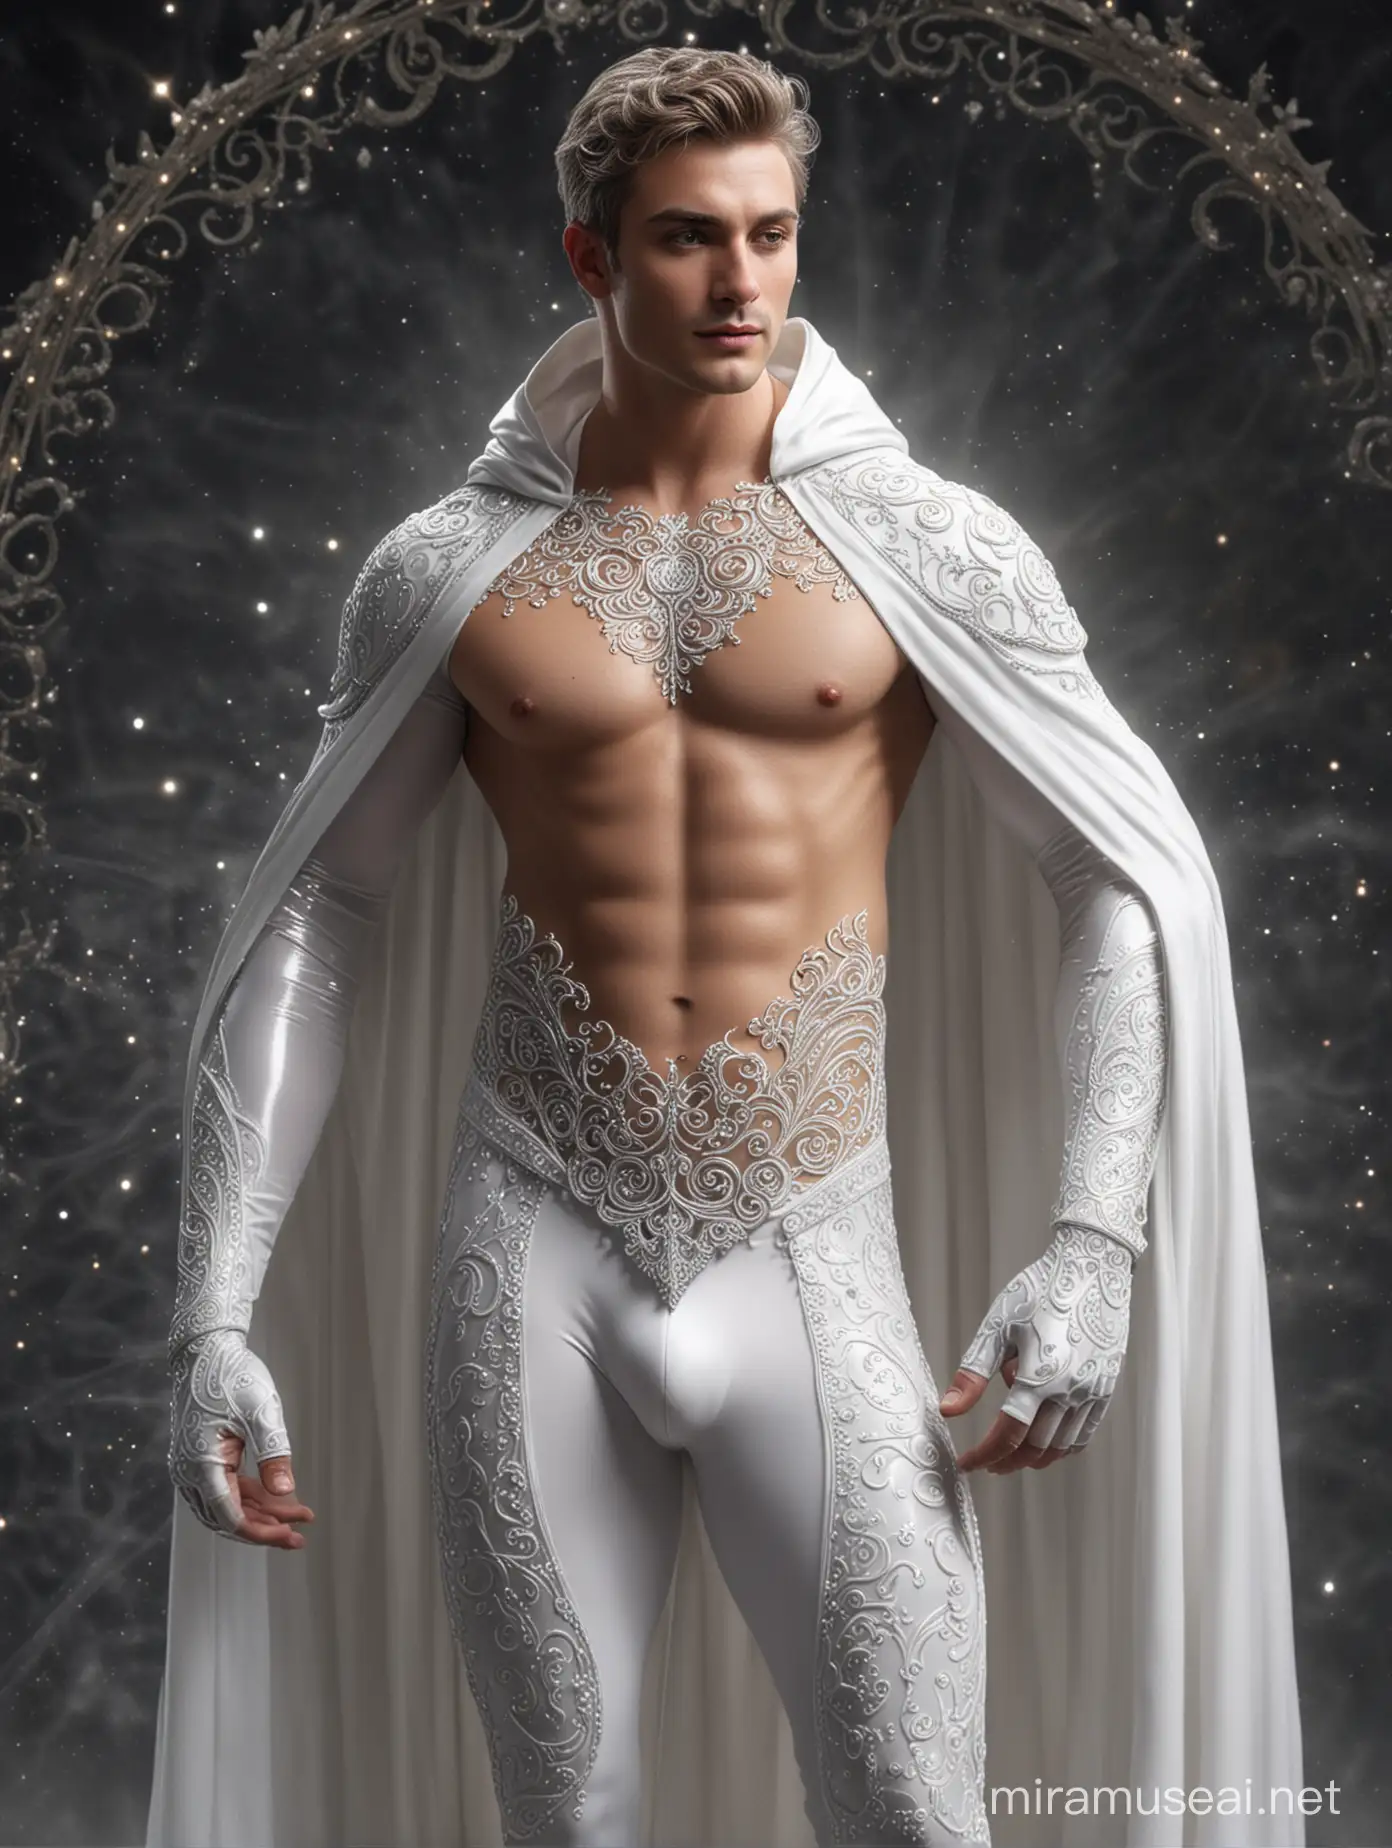 Handsome Hunky Fractal Celestial Islaw Zayne in Silver Swirls and TightFit Spandex